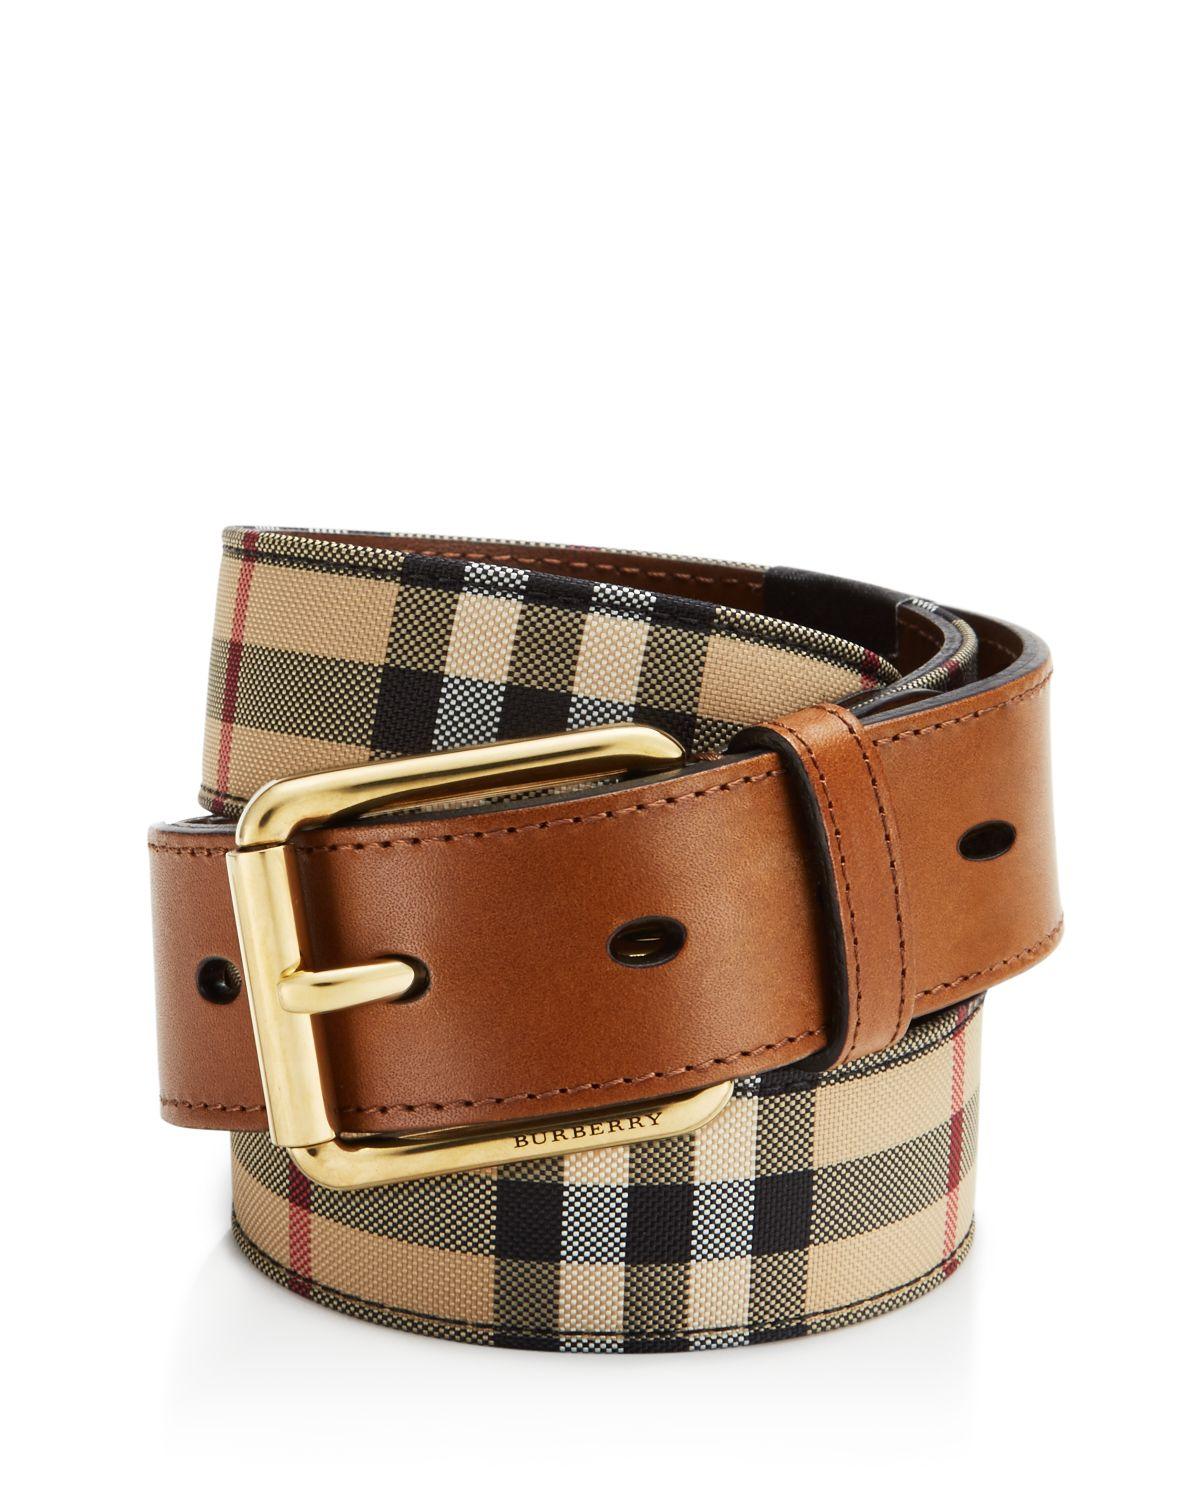 Lyst - Burberry Mark Horseferry Check Belt in Brown for Men